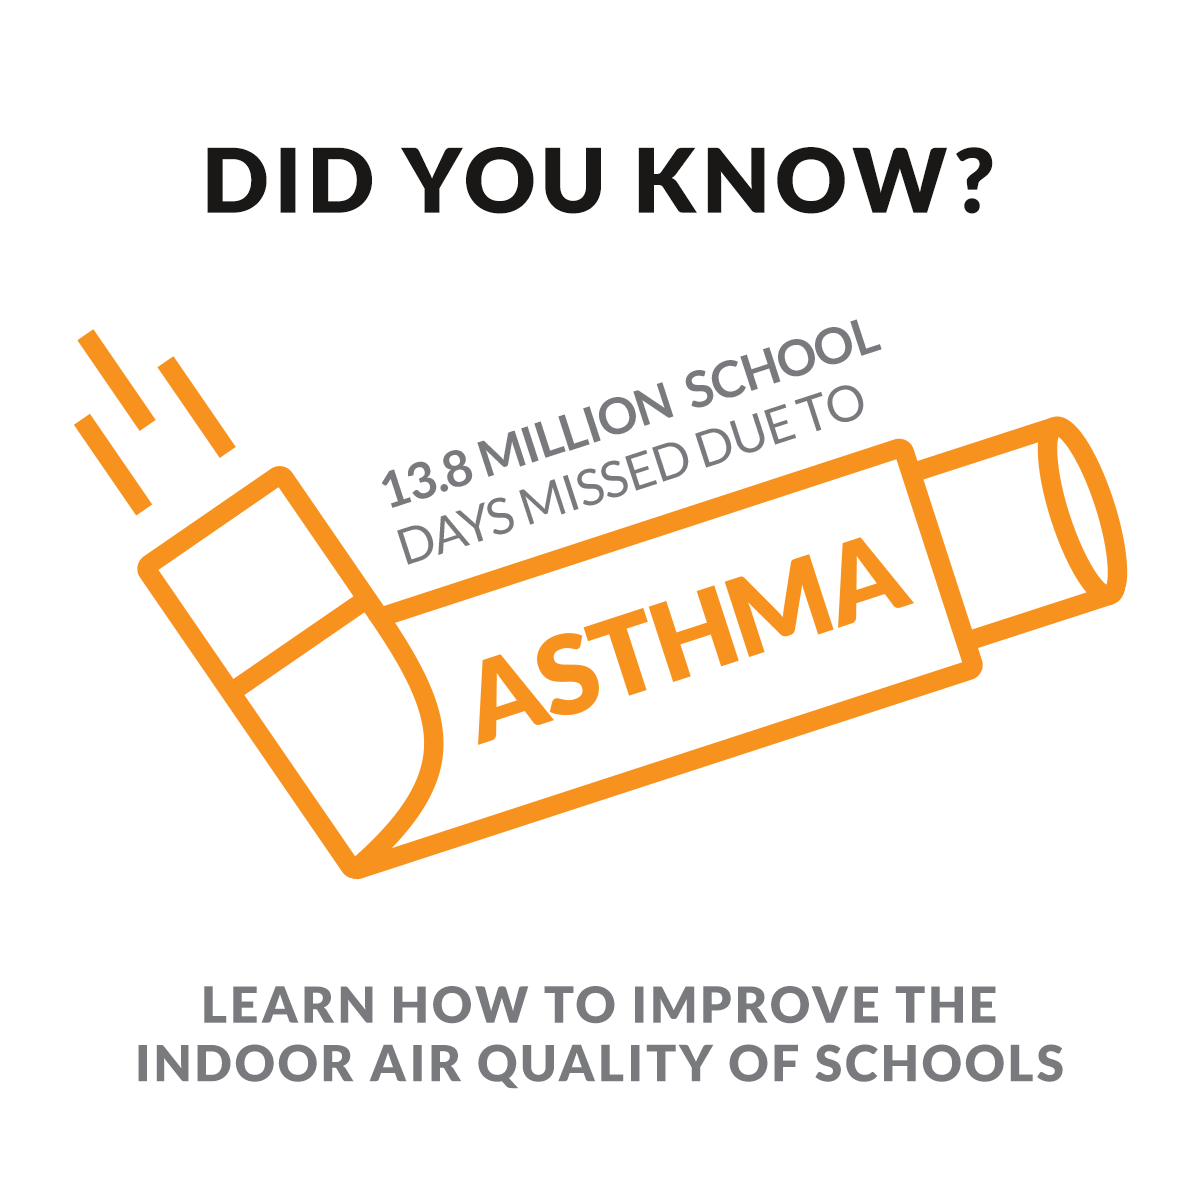 Did you know? 13.8 million school days are missed due to asthma. Learn how to improve the indoor air quality of your schools.